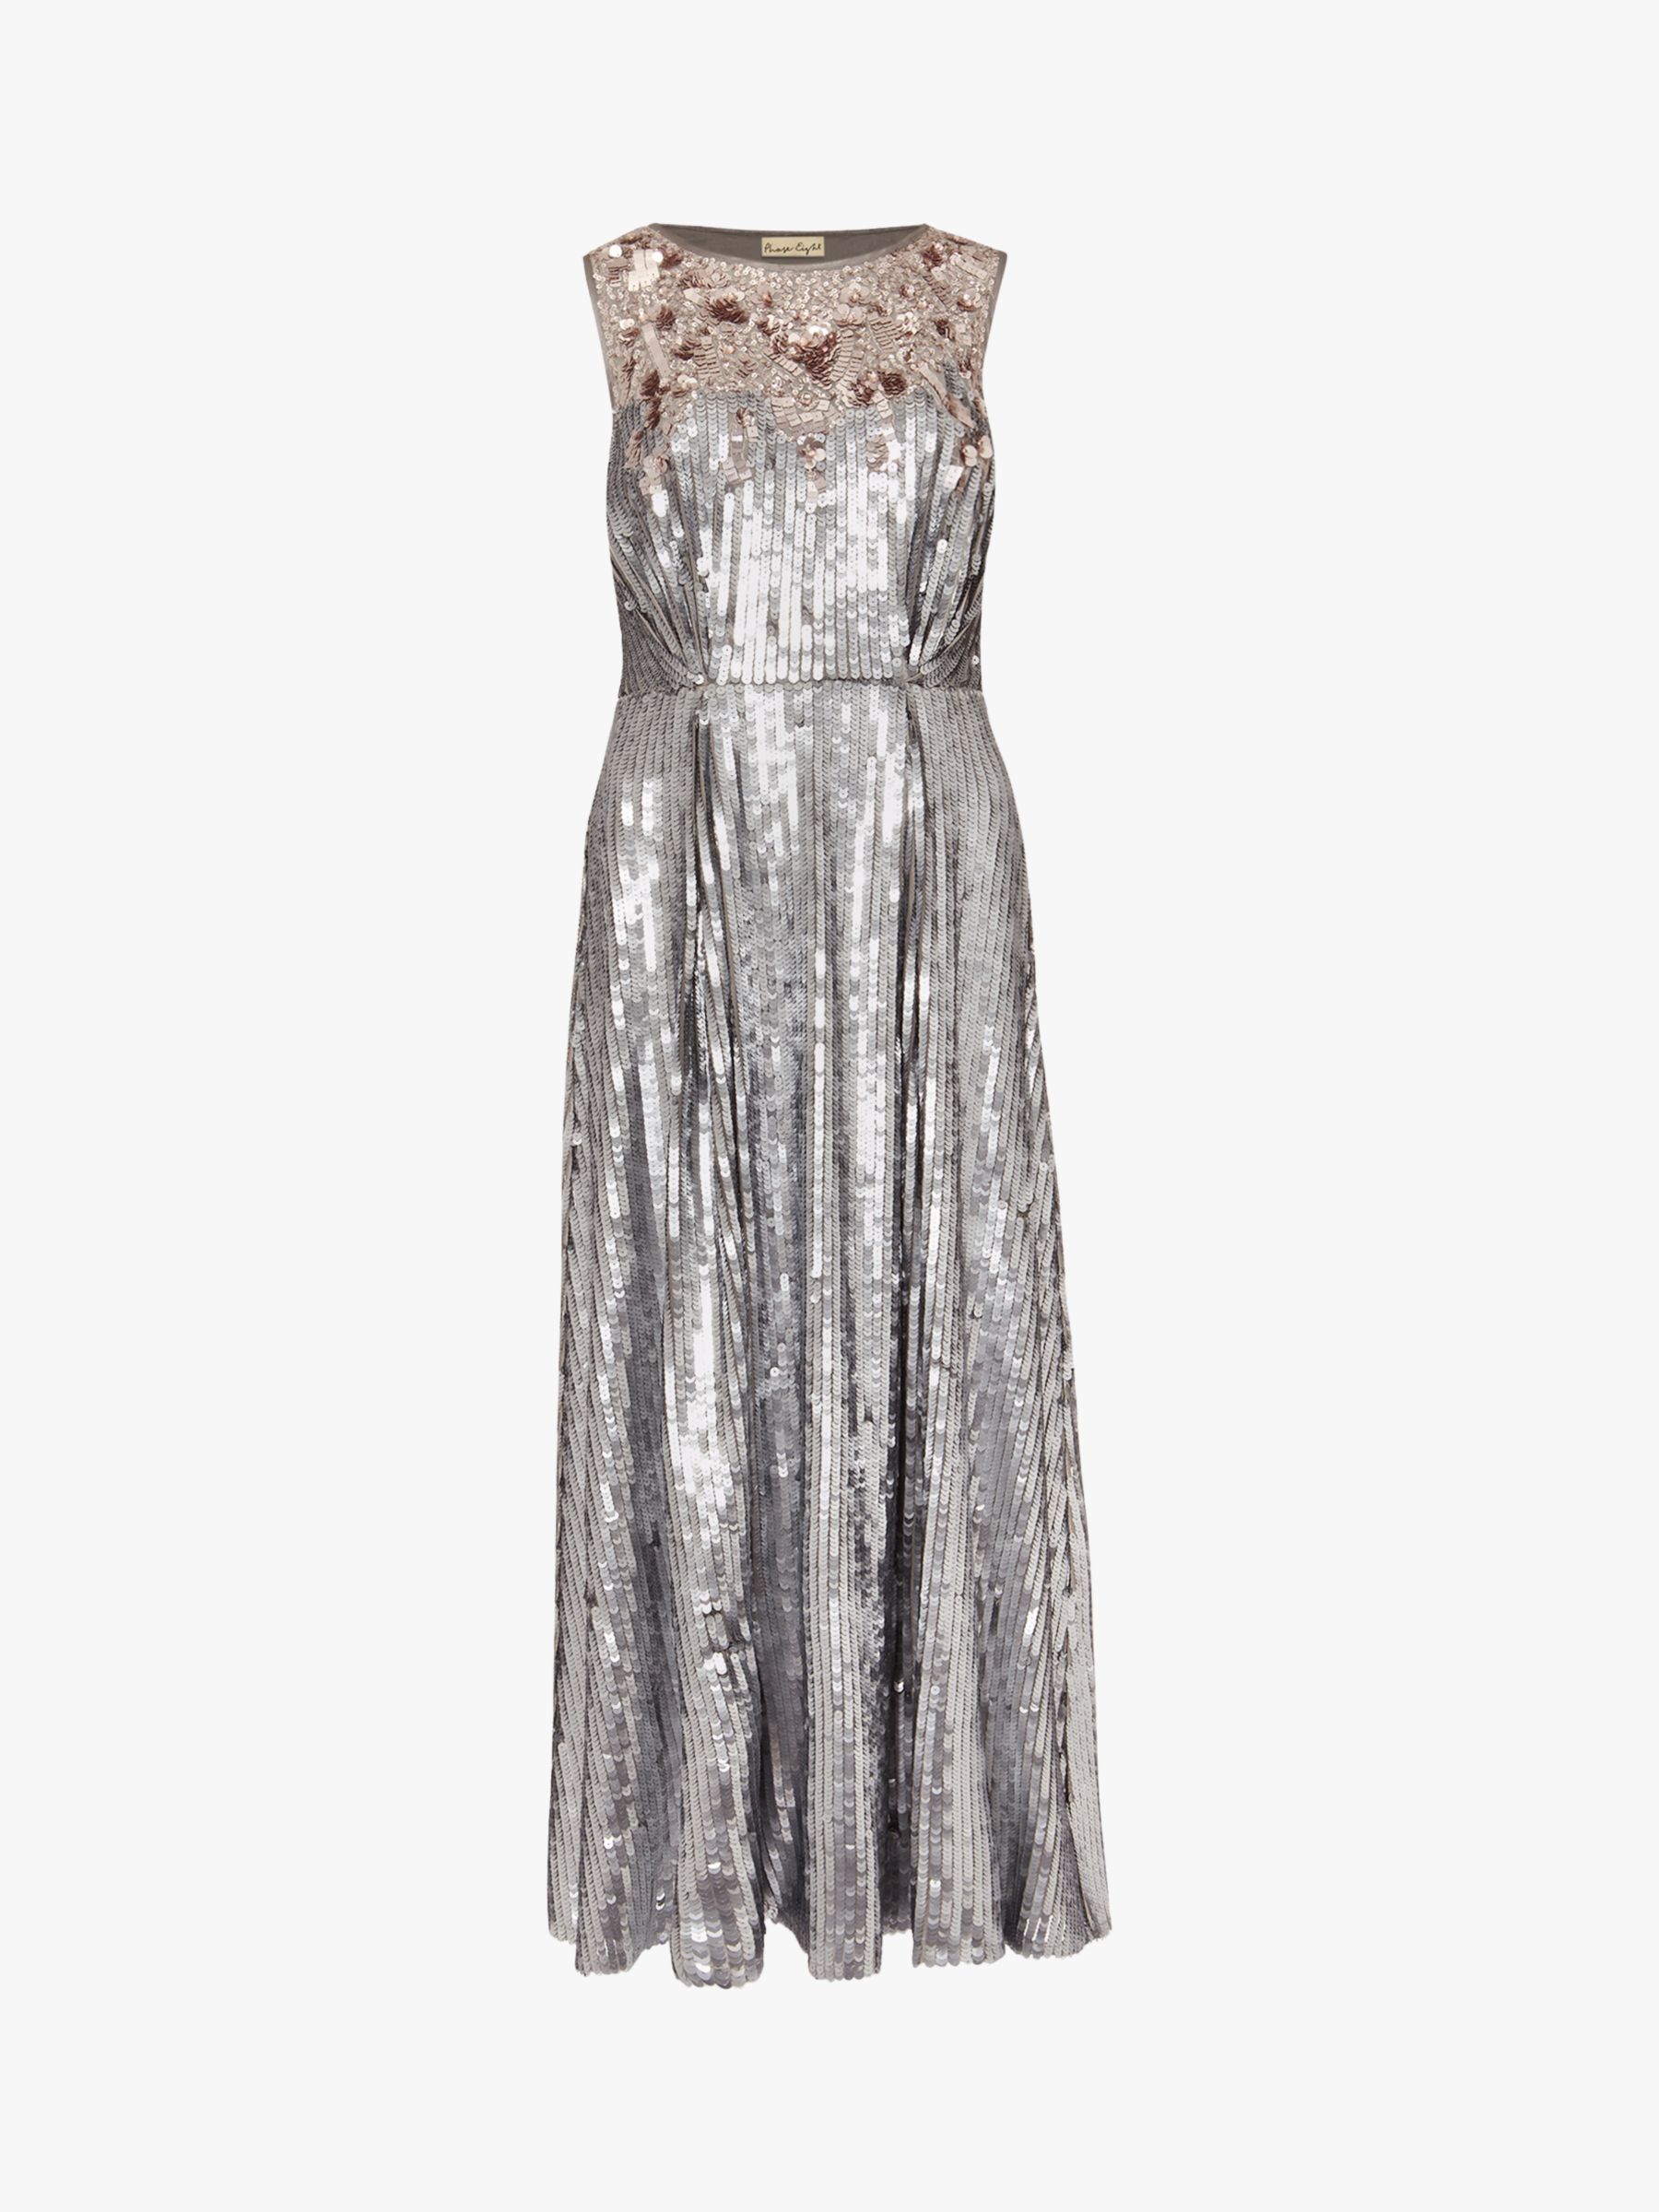 Phase Eight Lainey Shimmer Sequined Midi Dress, Silver, 6